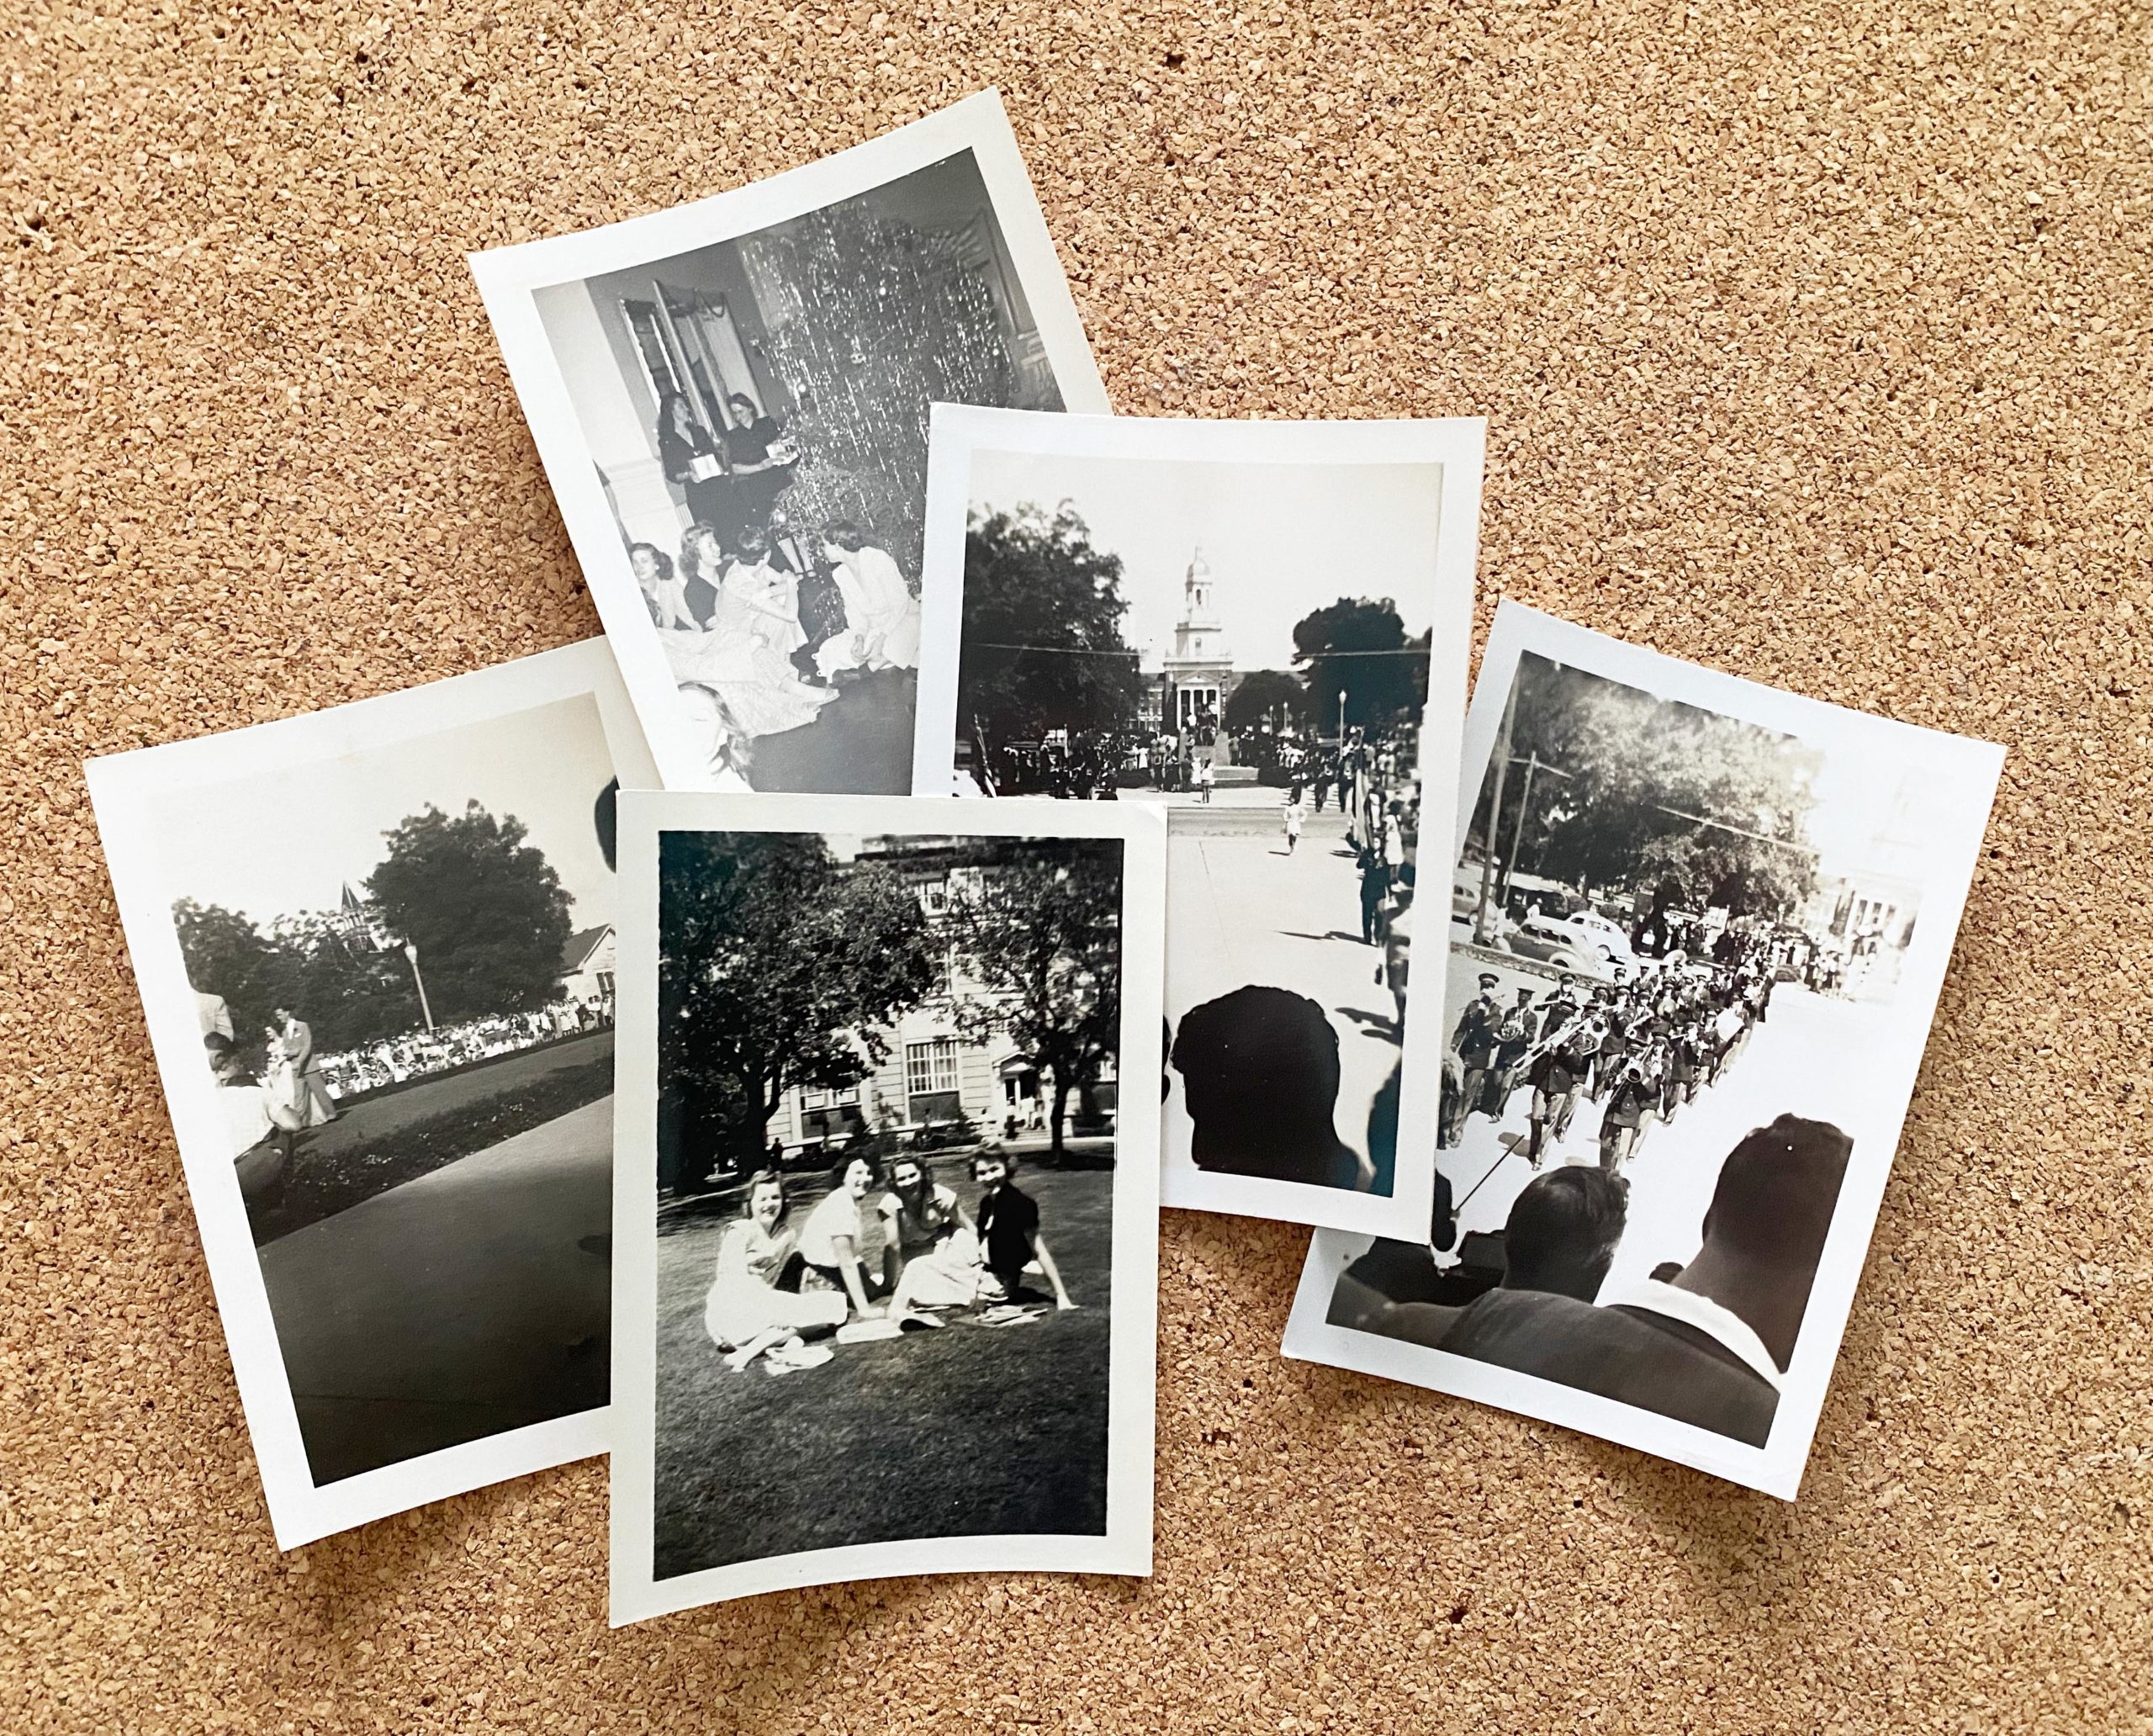 Collage of photos showing Baylor campus life in the 1940s